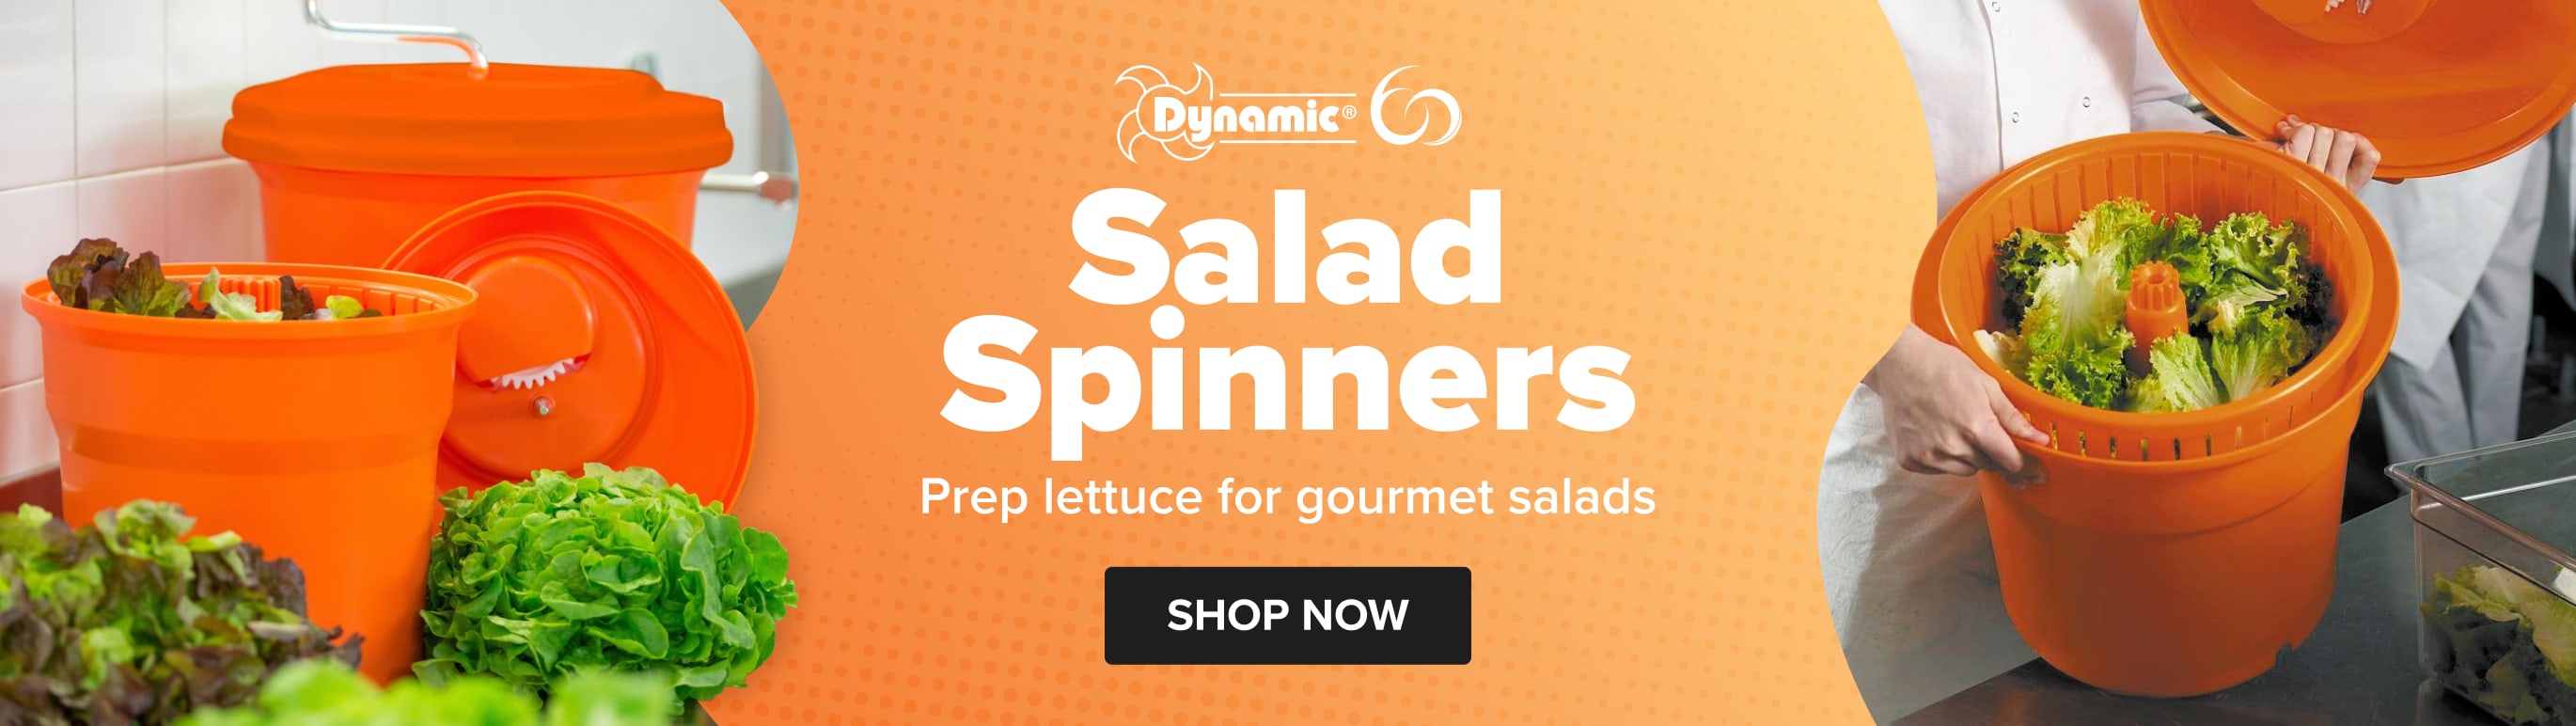 Dynamic Salad Spinners